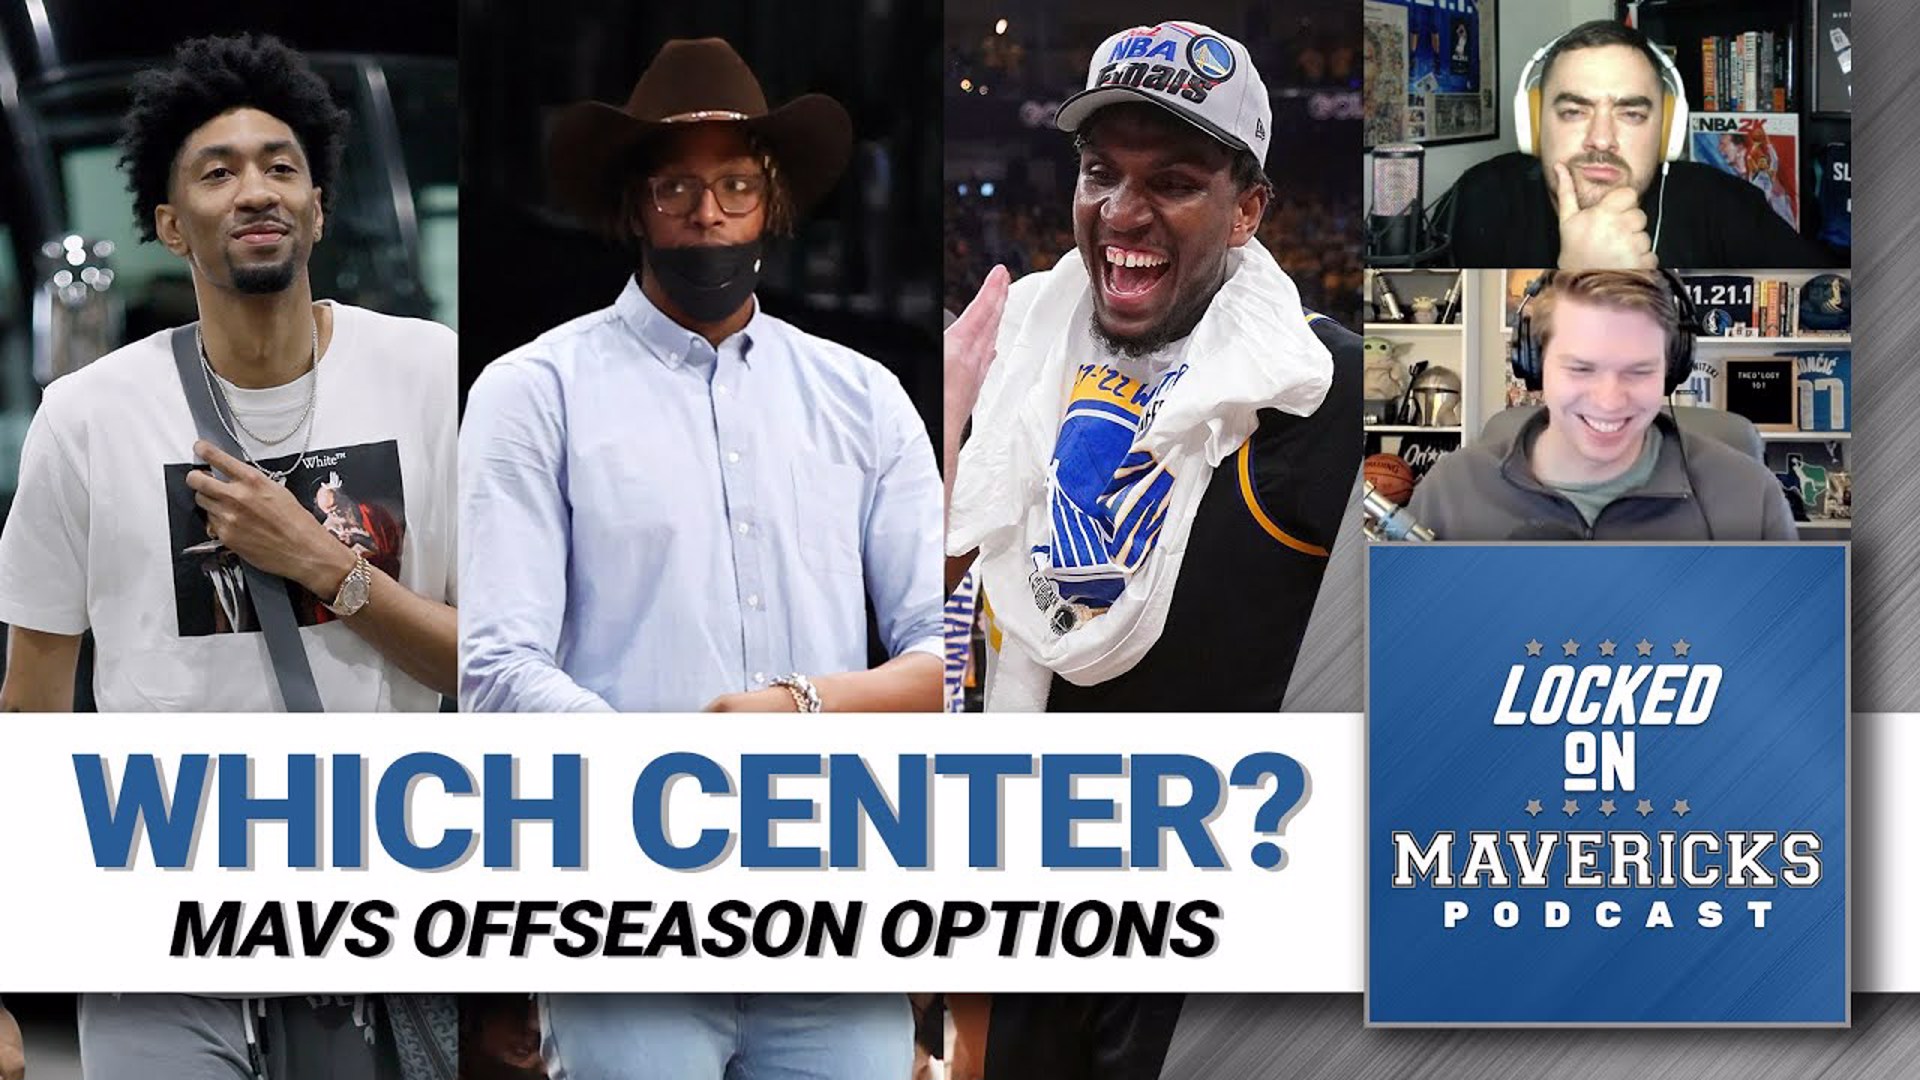 Nick Angstadt & Isaac Harris break down the Mavs upgrade options at the center spot. What kind of qualities are the Mavs looking for in a big man?